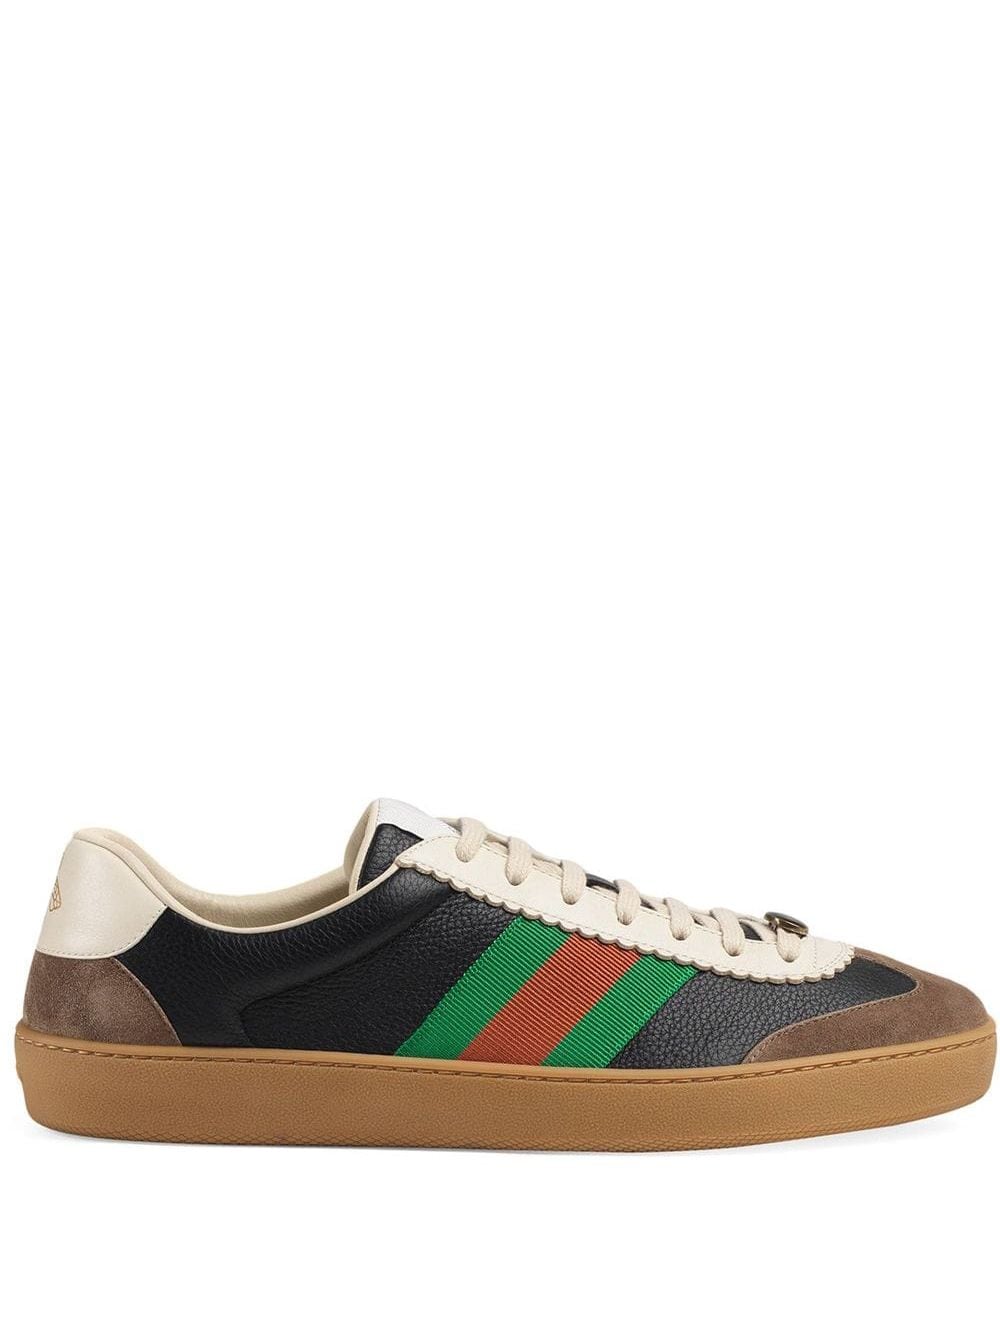 Gucci Leather And Suede Web Sneakers 